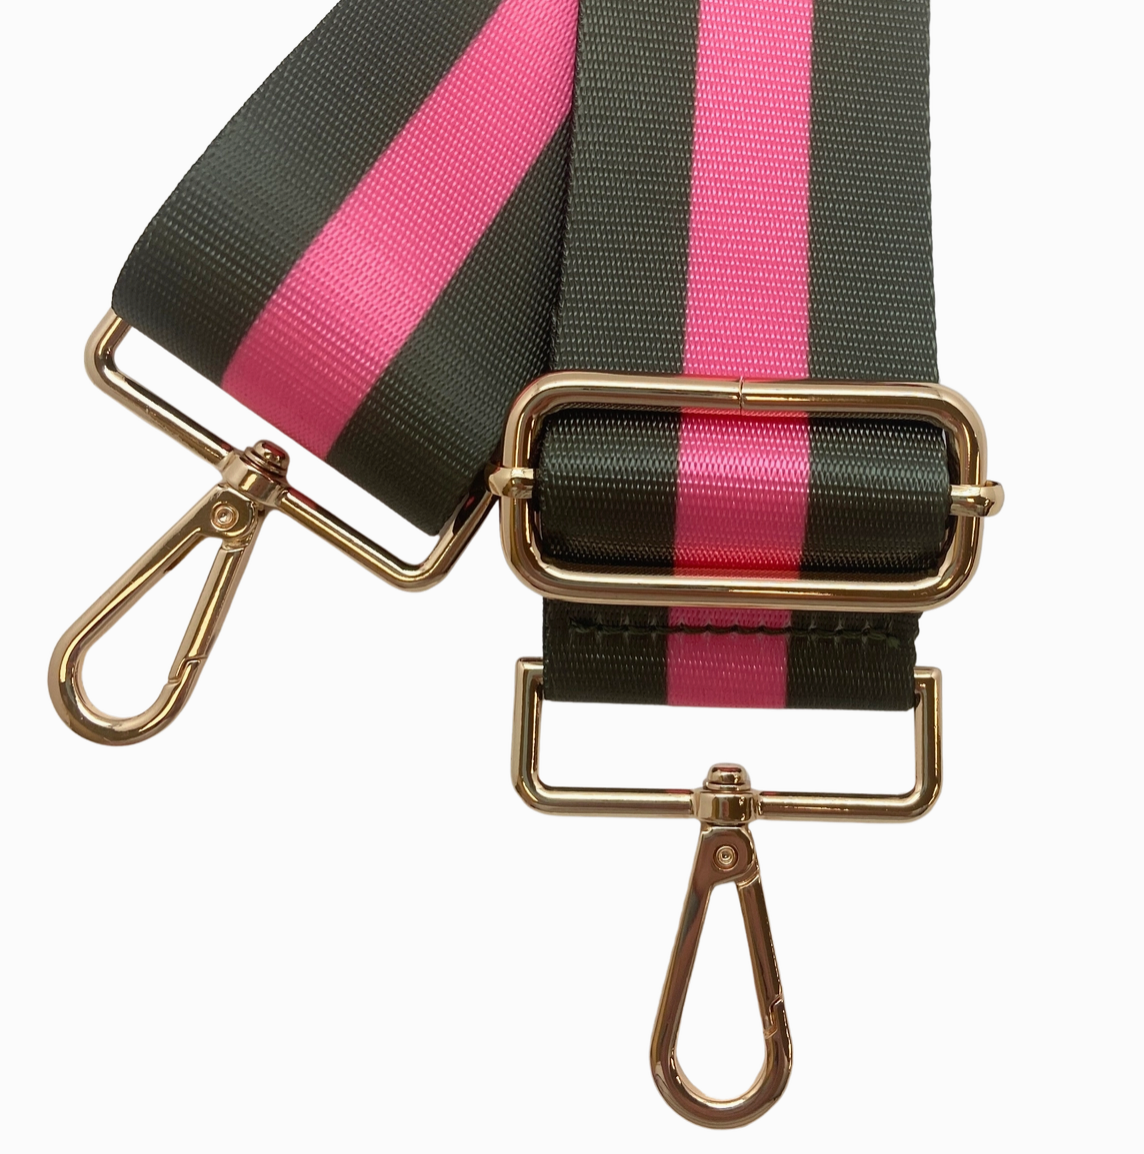 Crossbody Bag Strap in Green with Stripes